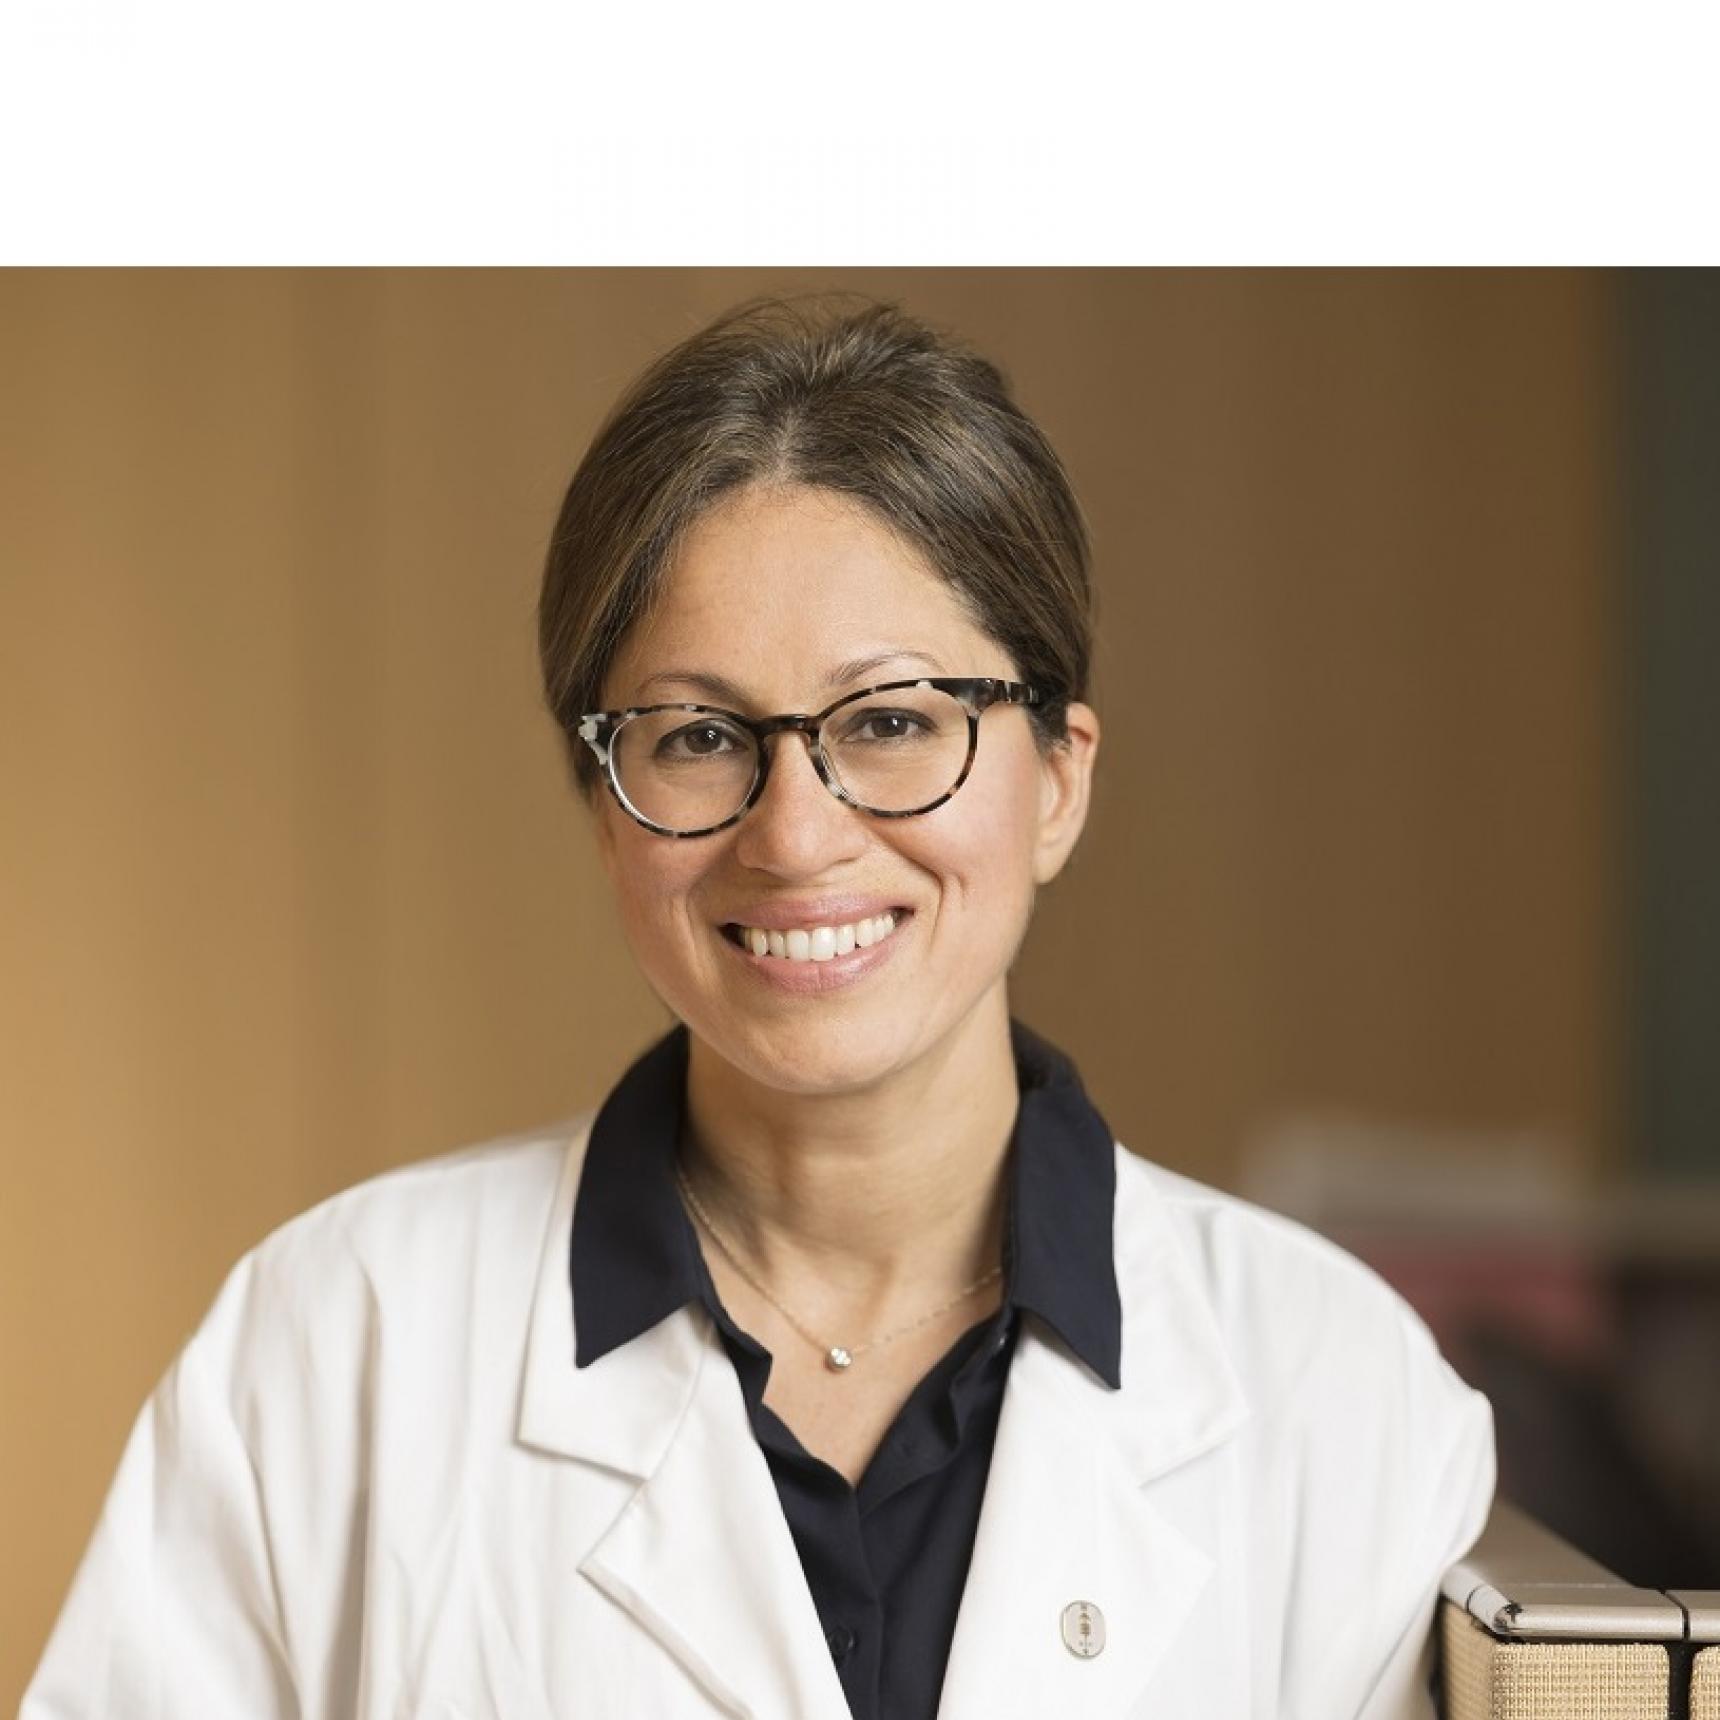 Headshot of Dr. Shanu Modi in a clinical sitting wearing a white coat, glasses, and brown hair. She is smiling facing forward.